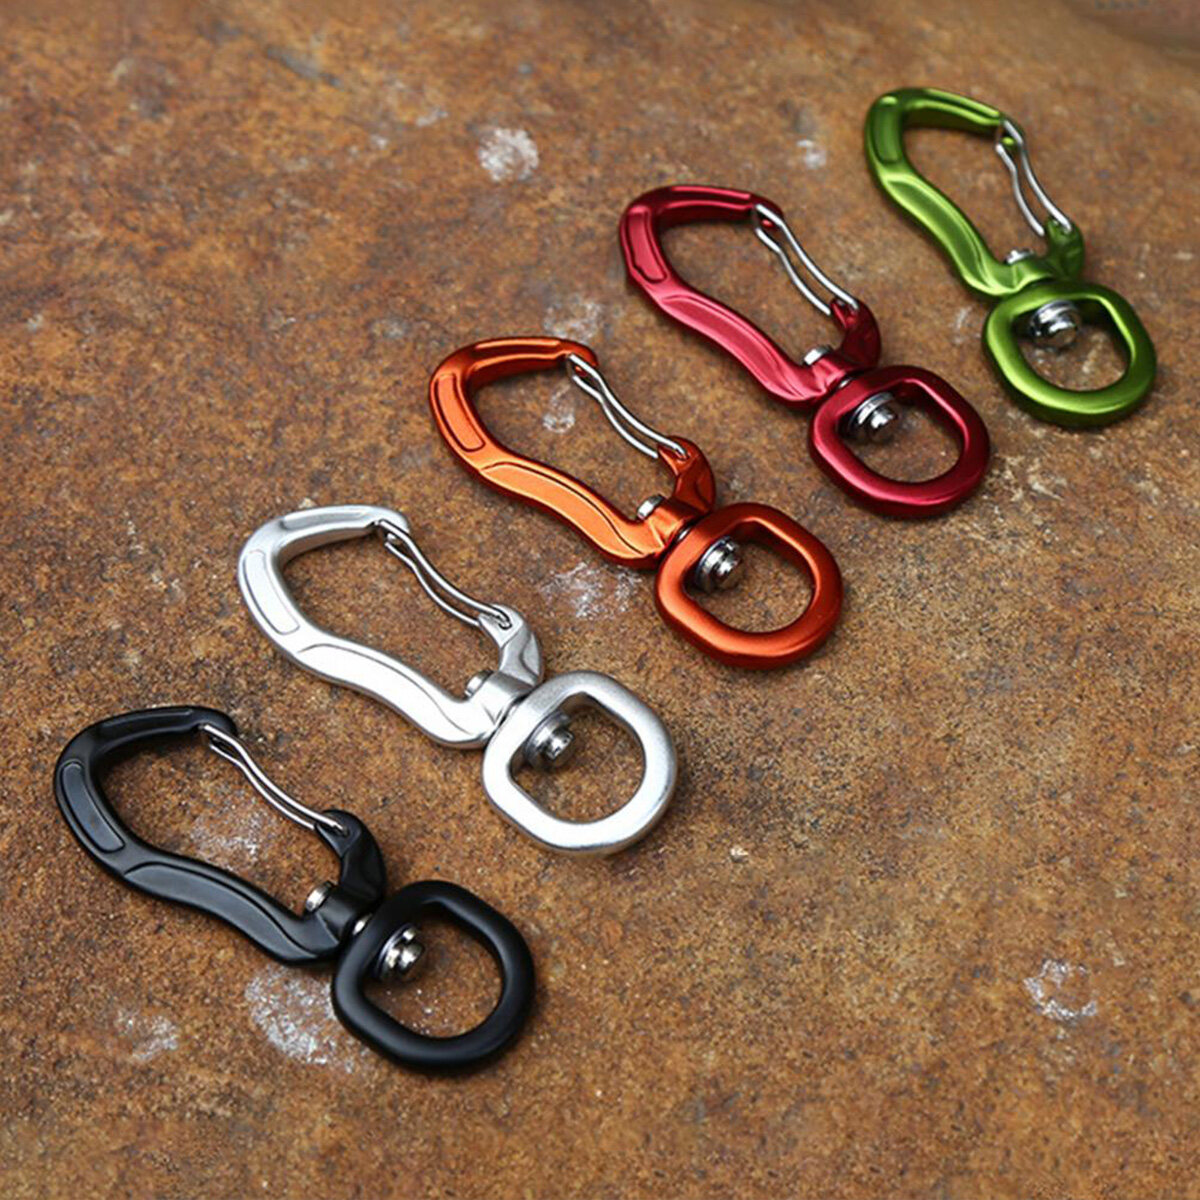 carabiner swivel and shackle, stainless steel shackle manufacturers, stainless steel shackle factory